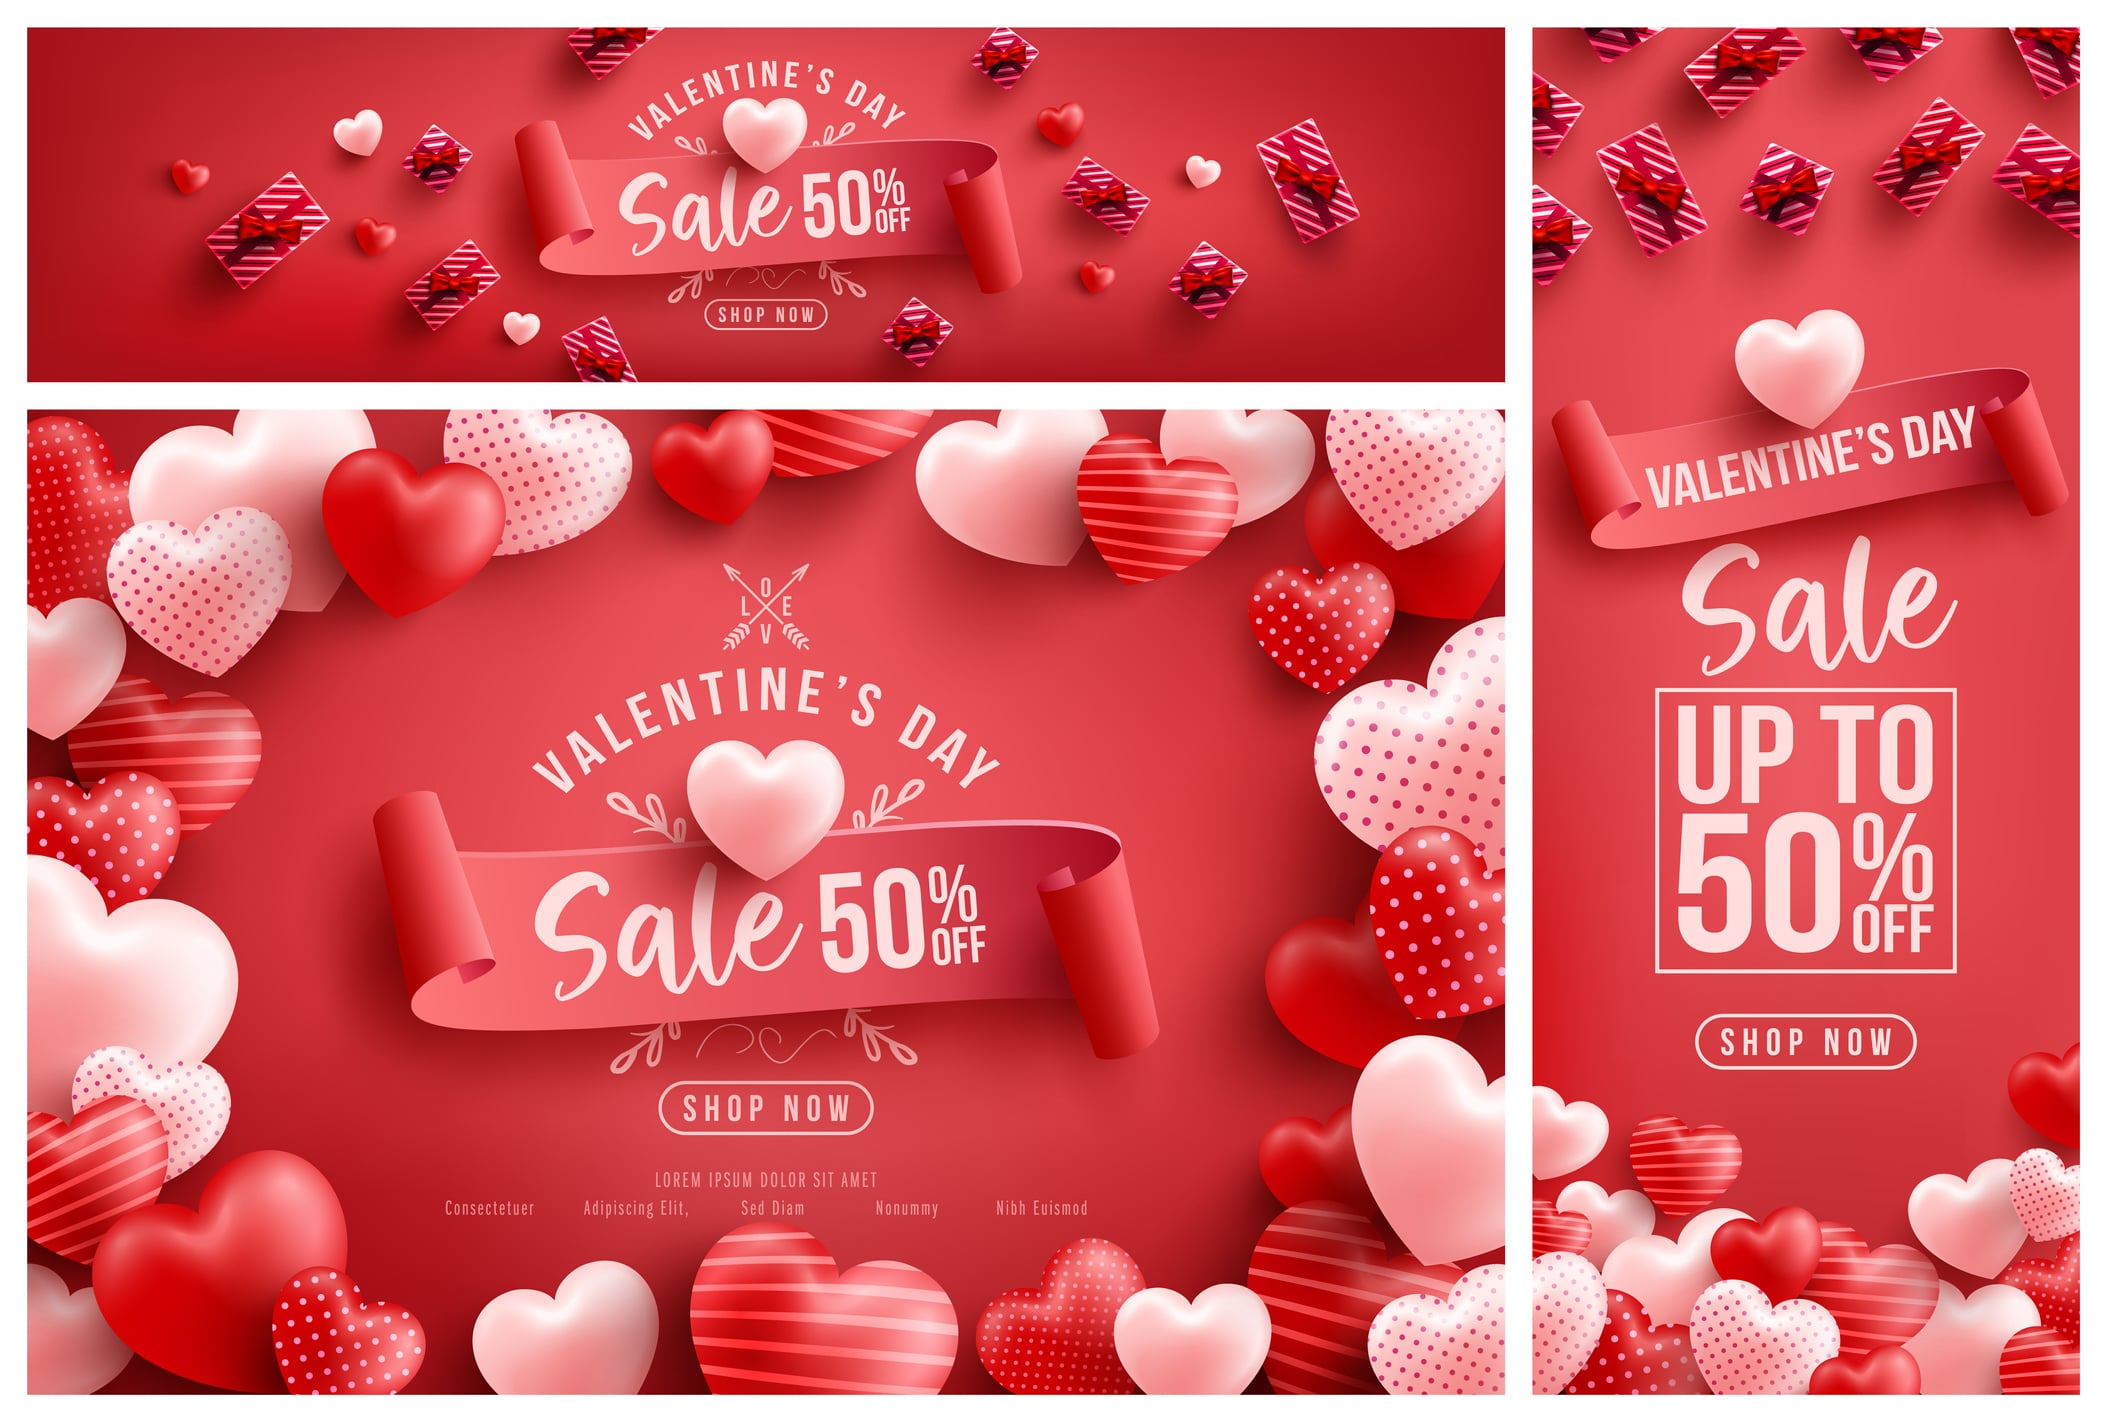 valentines day inspired posters for retailer